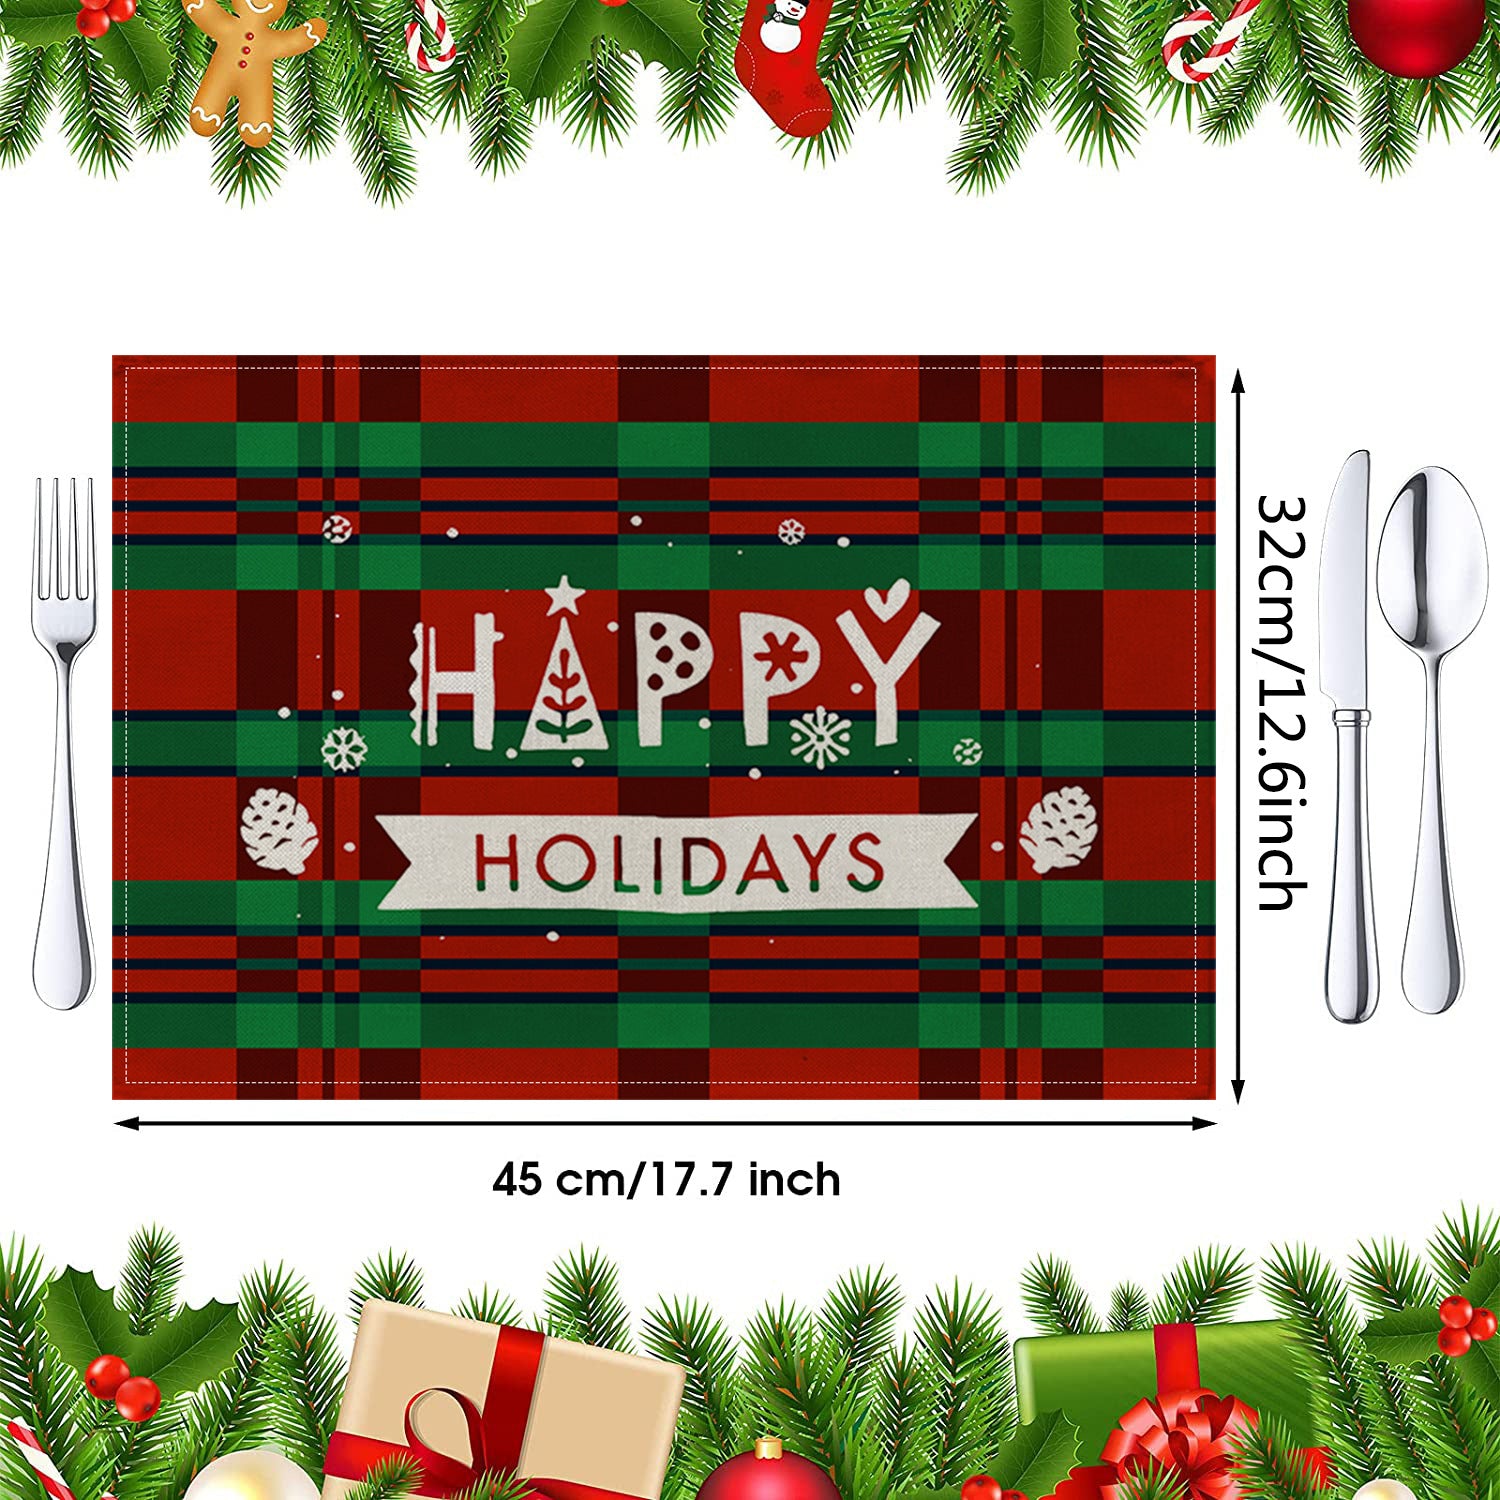 Christmas Cotton Waterproof Linen Insulated Placemats, Outdoor and Indoor Christmas decorations Items, Christmas ornaments, Christmas tree decorations, salt dough ornaments, Christmas window decorations, cheap Christmas decorations, snowmen, and ornaments.